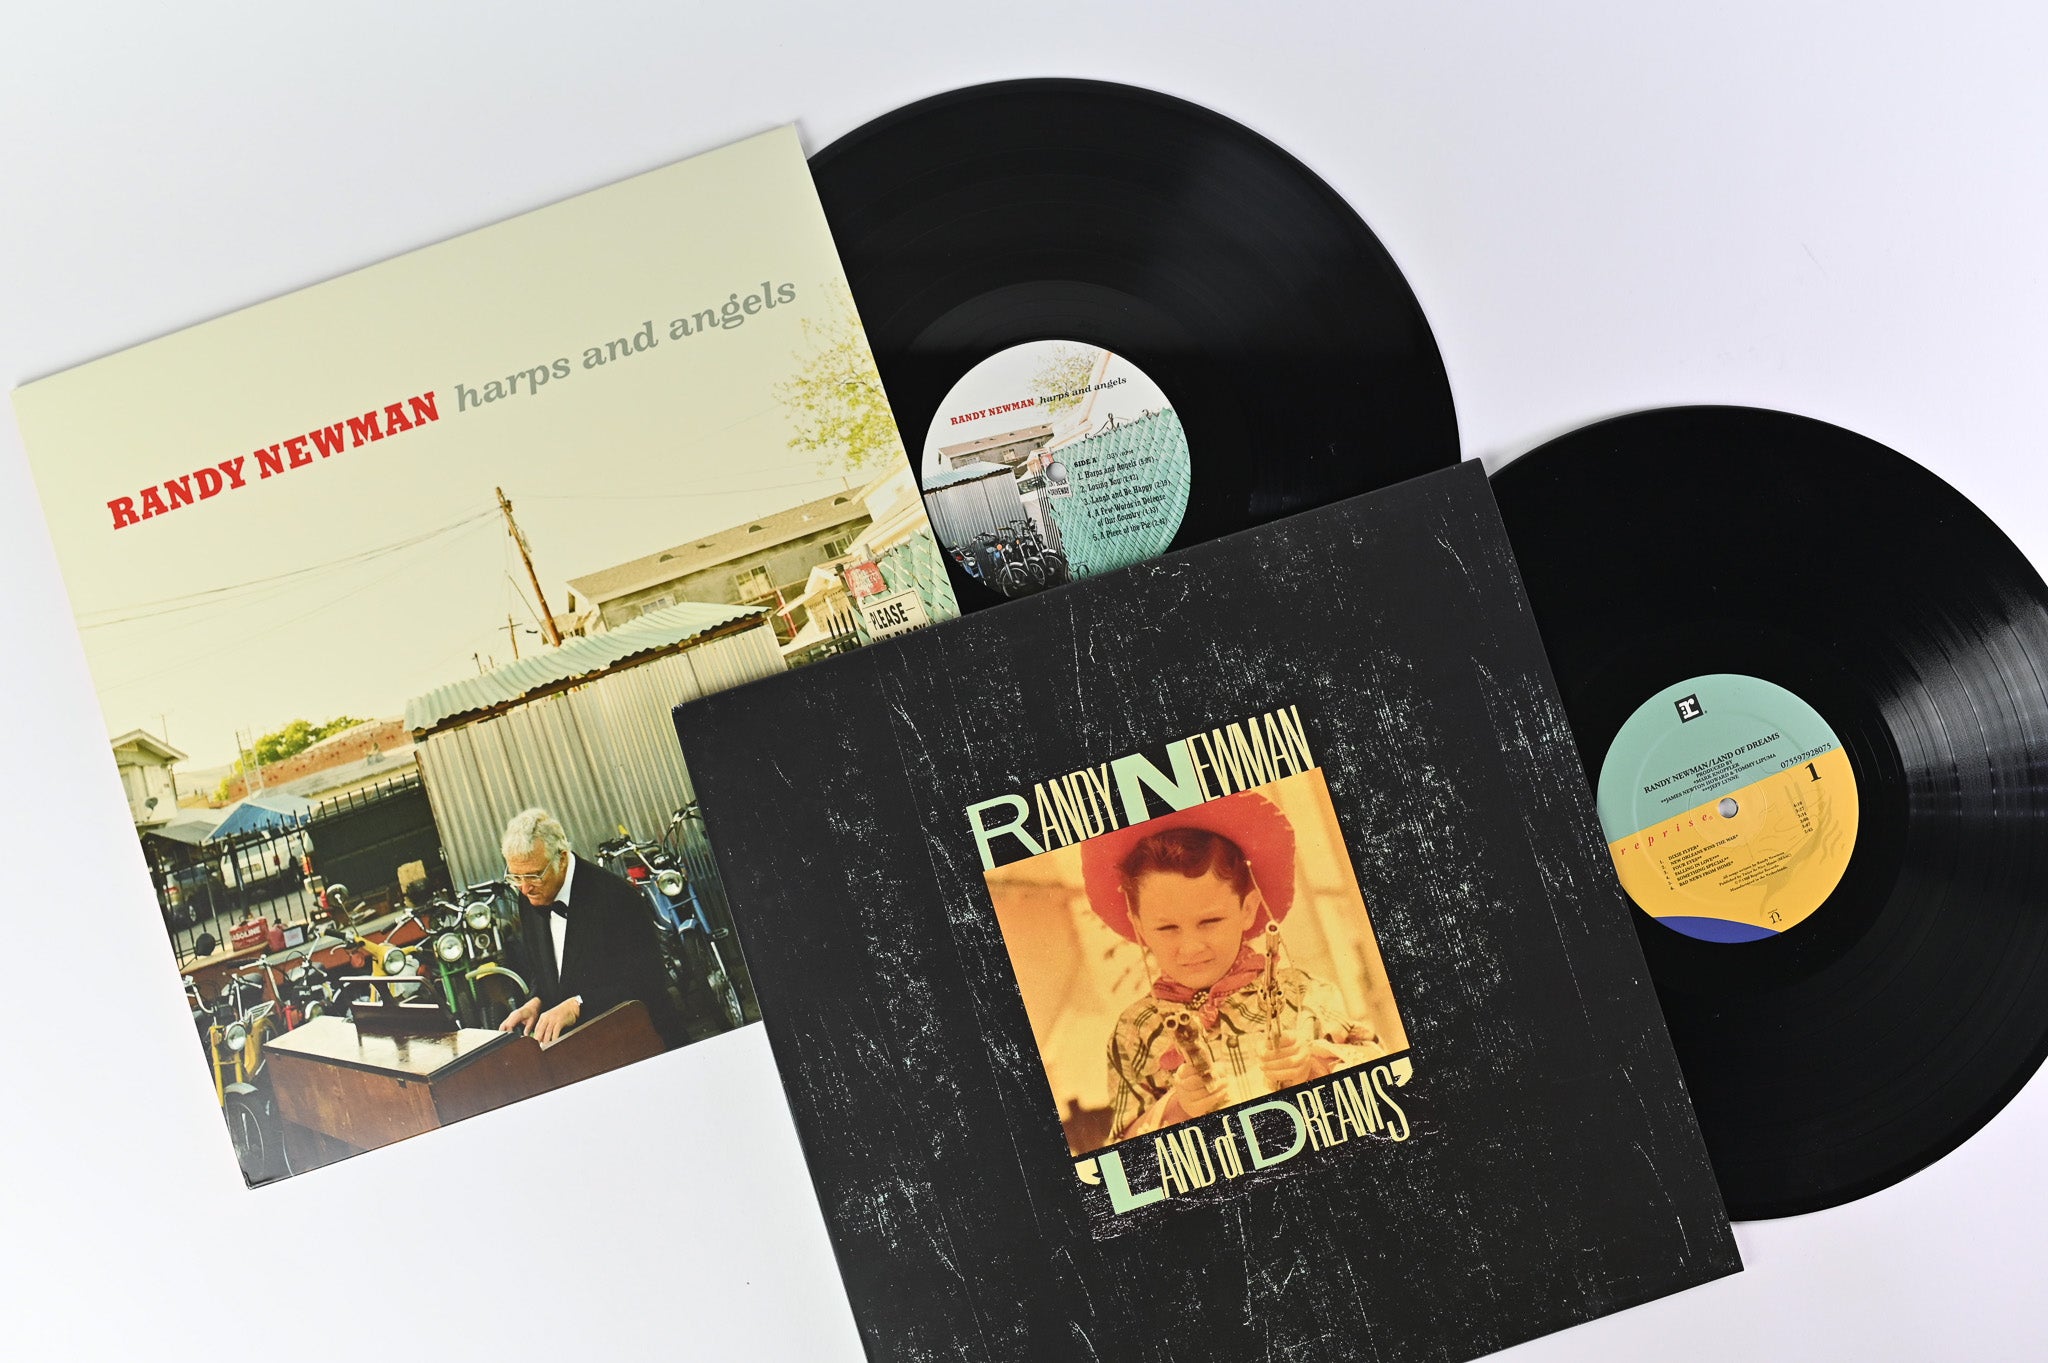 Randy Newman - Roll With The Punches (The Studio Albums 1979-2017) on Nonesuch RSD 2021 Box Set